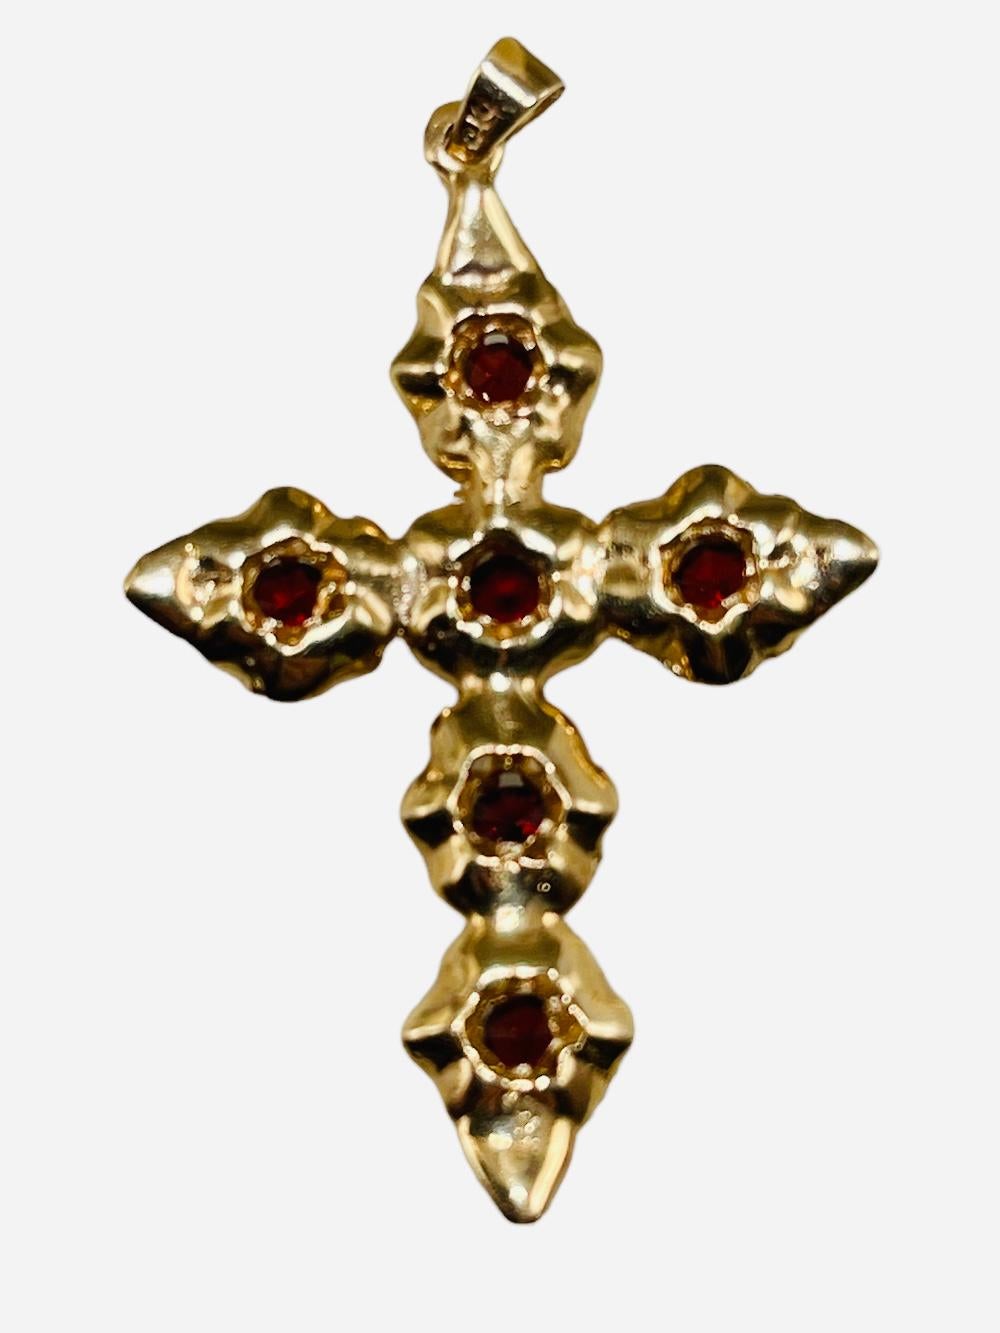 This is a 14K yellow gold and garnet Roses flower cross pendant. This cross pendant has six round cut faceted garnets that embellish the roses that adorn the cross. They are mounted in 14K gold prong setting. 